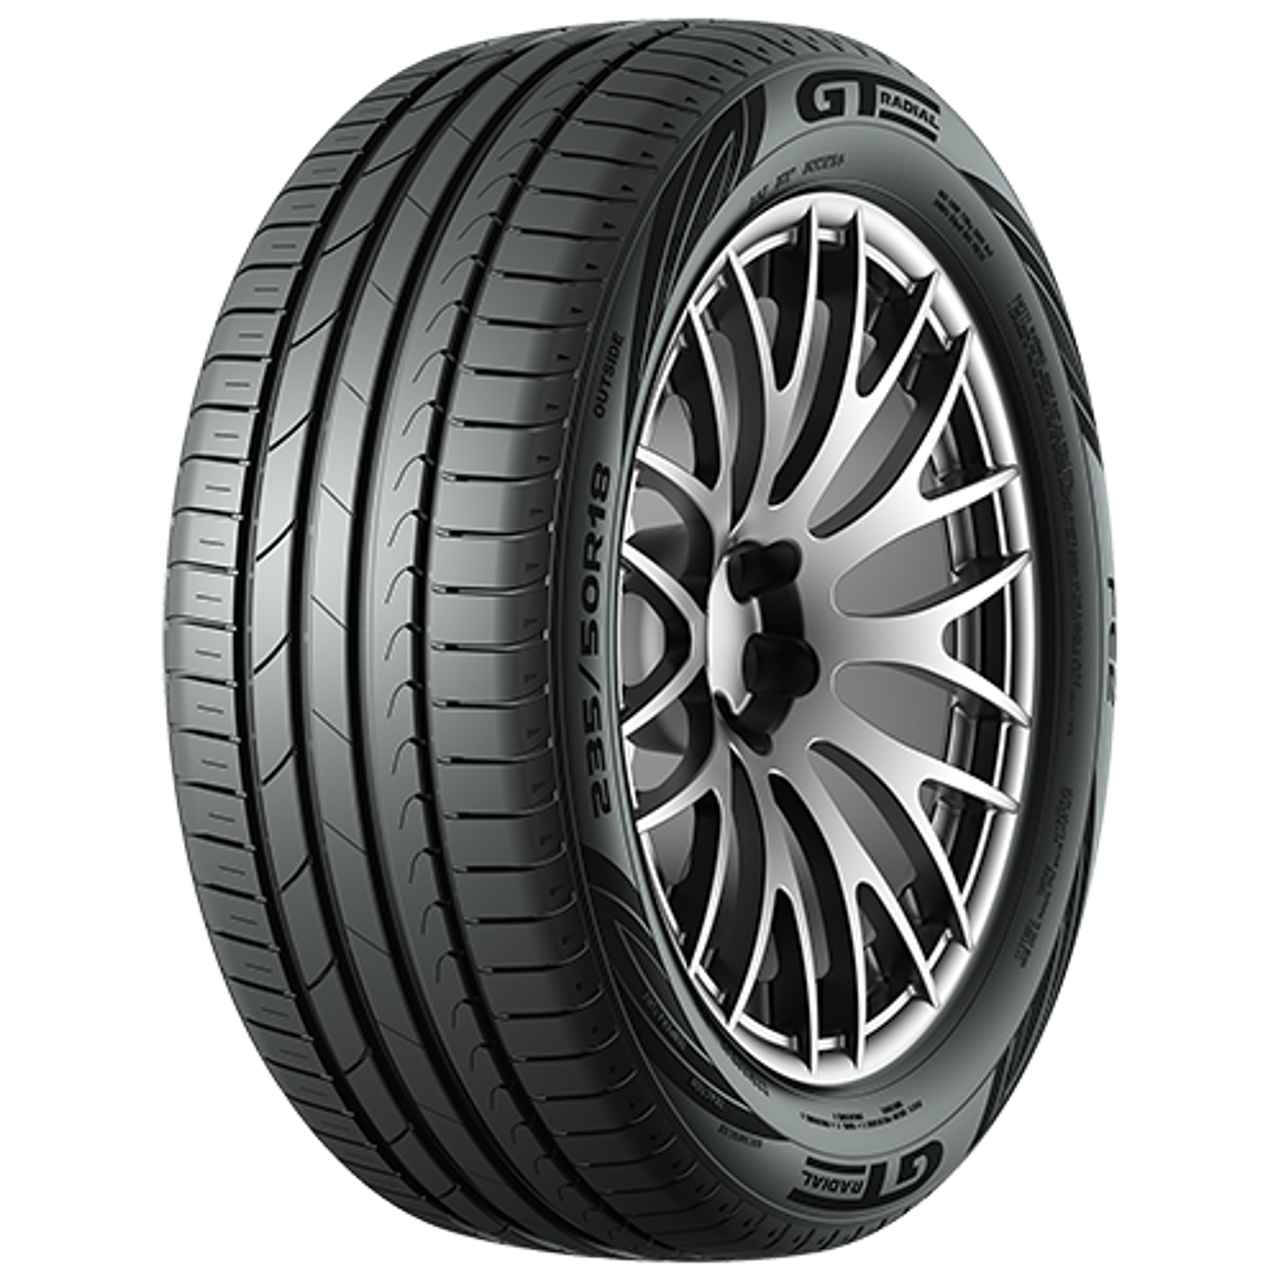 GT-RADIAL FE2 195/65R15 95H BSW